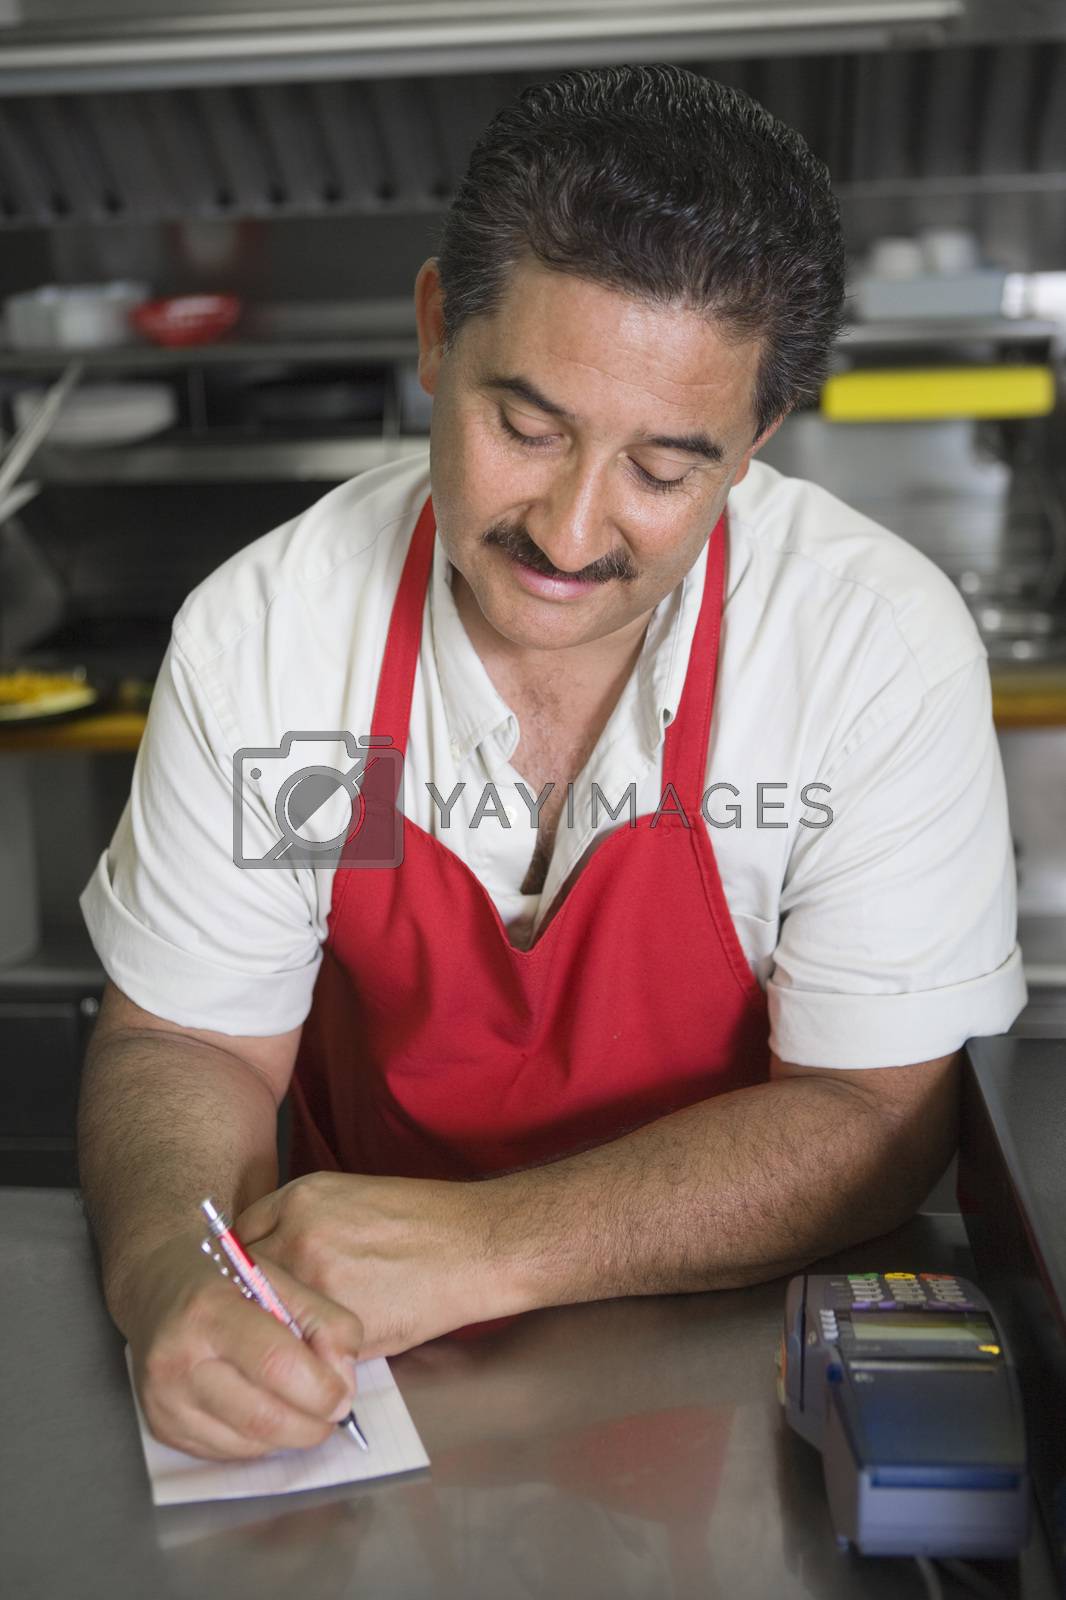 Royalty free image of Hispanic Latin man writing an order while standing at counter in restaurant by moodboard